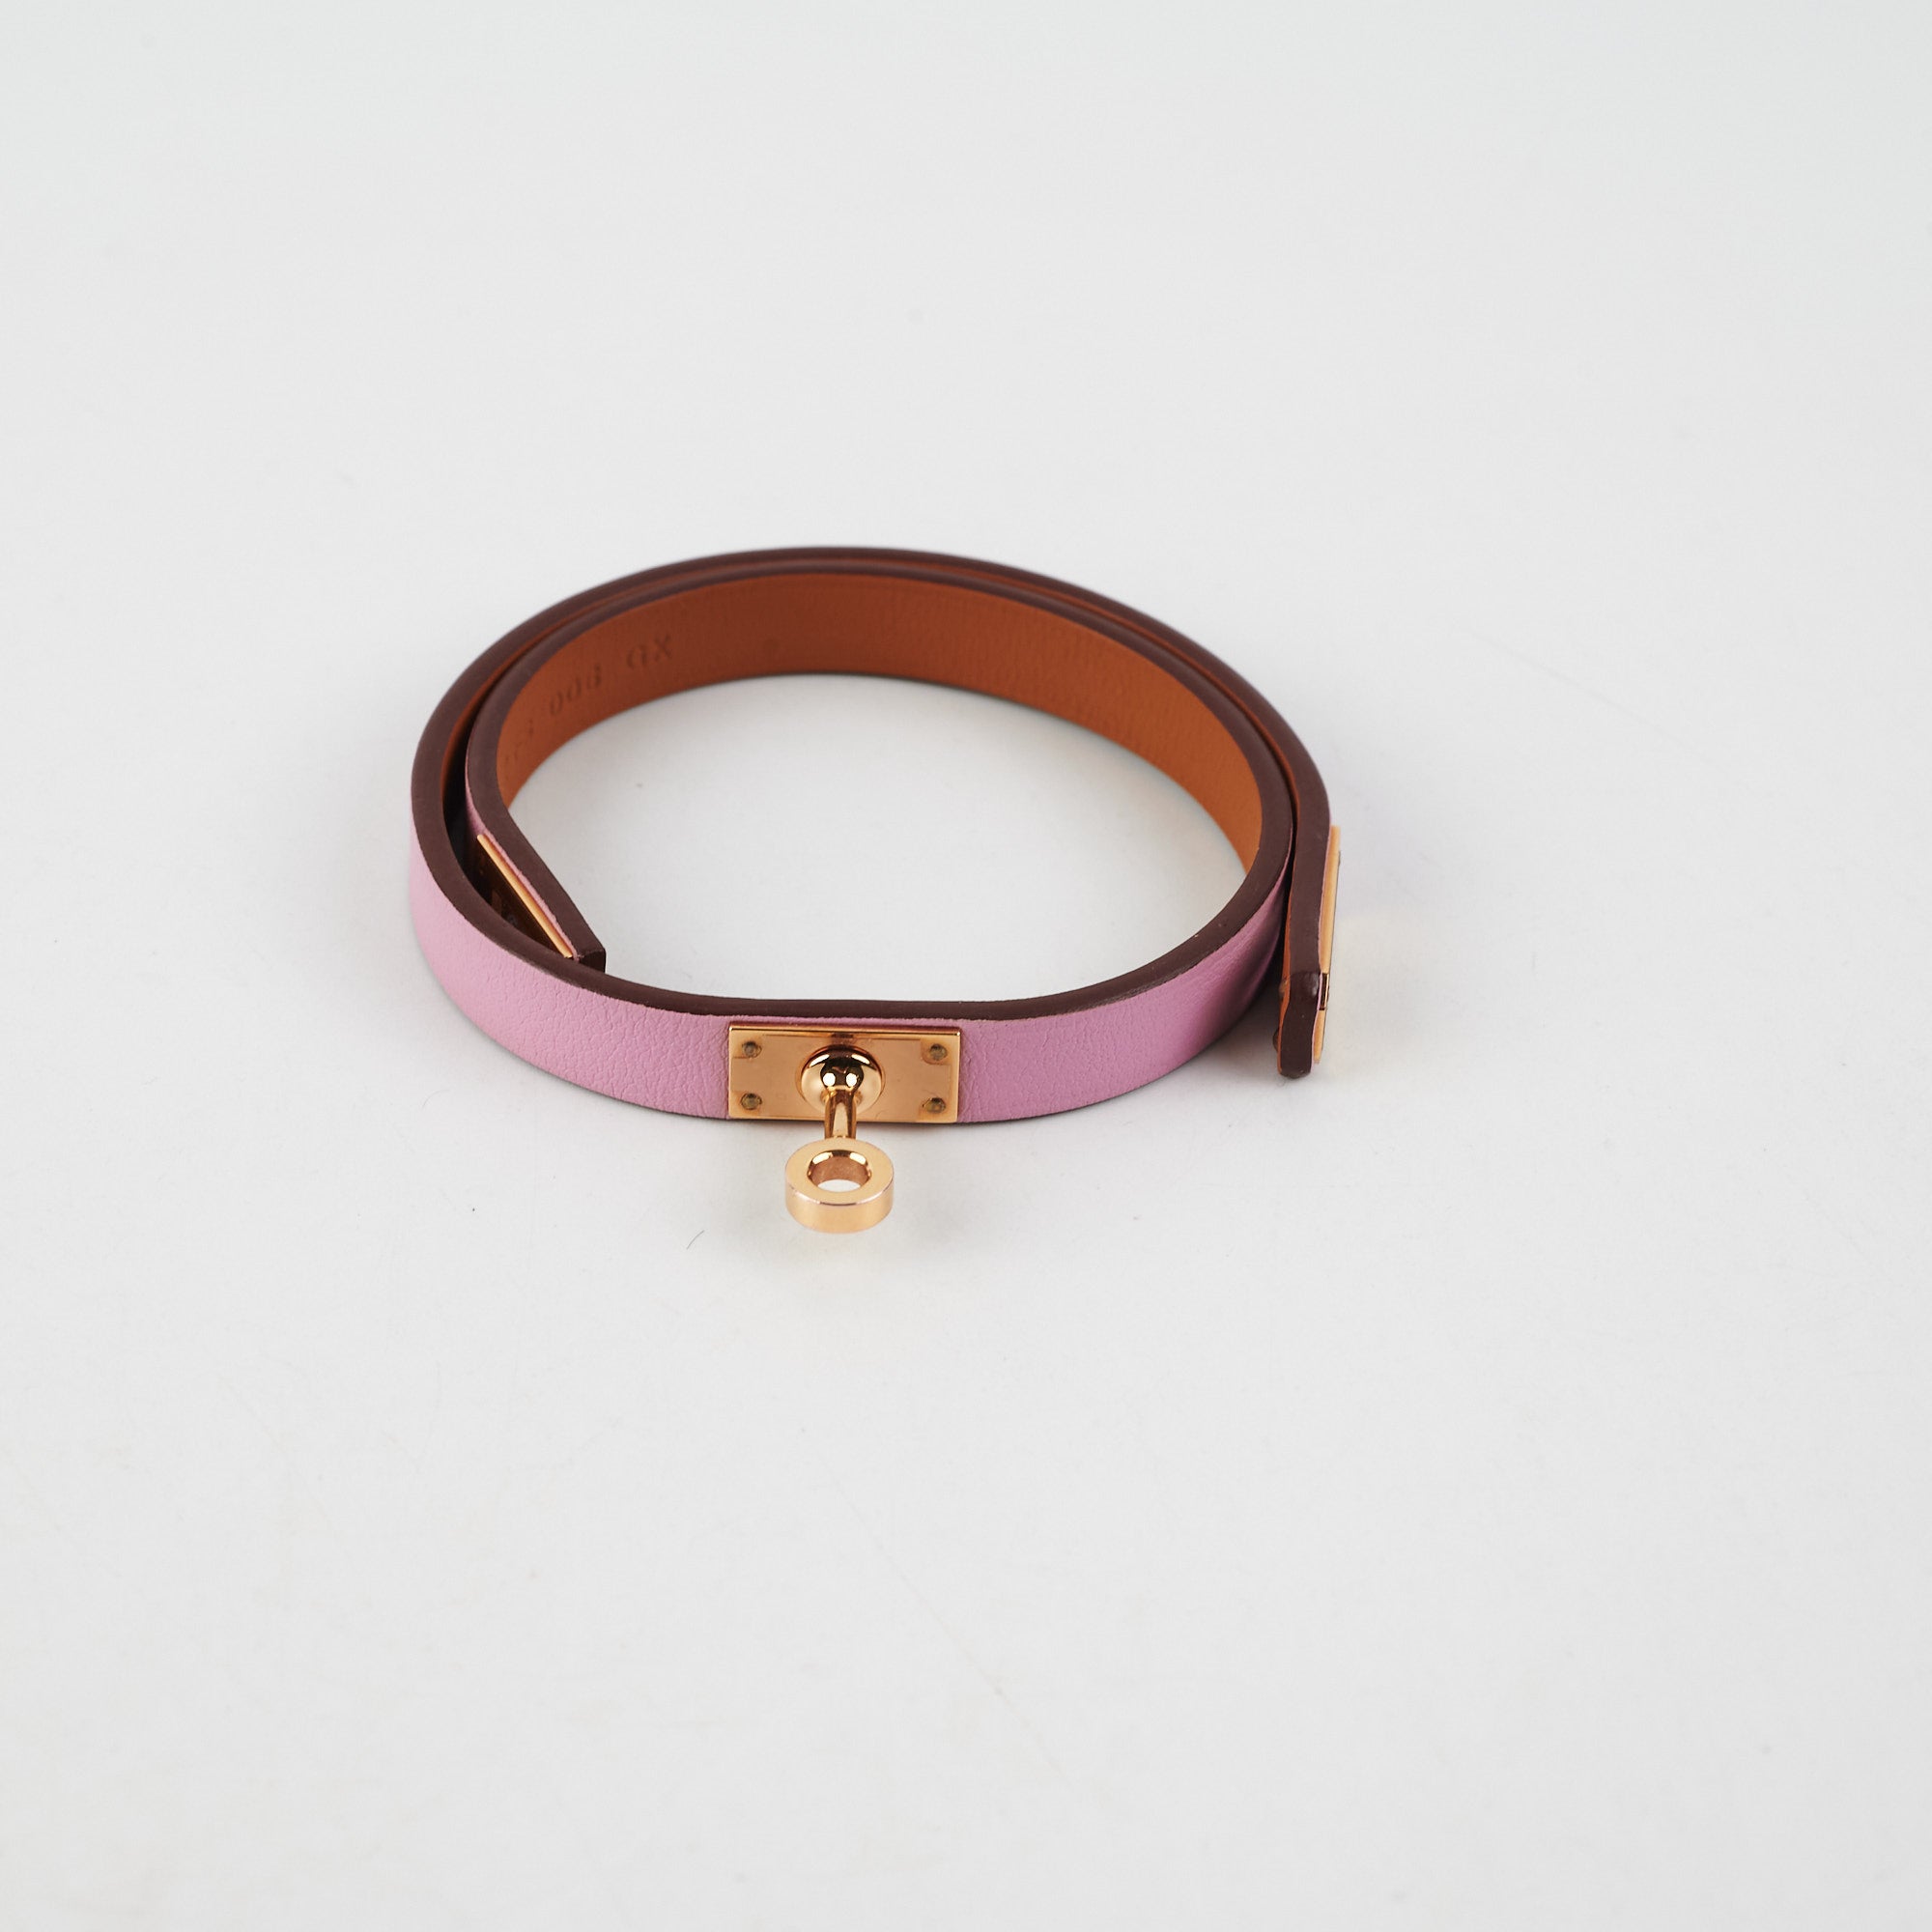 Hermes Kelly Double Tour Bracelet In Gold and Purple